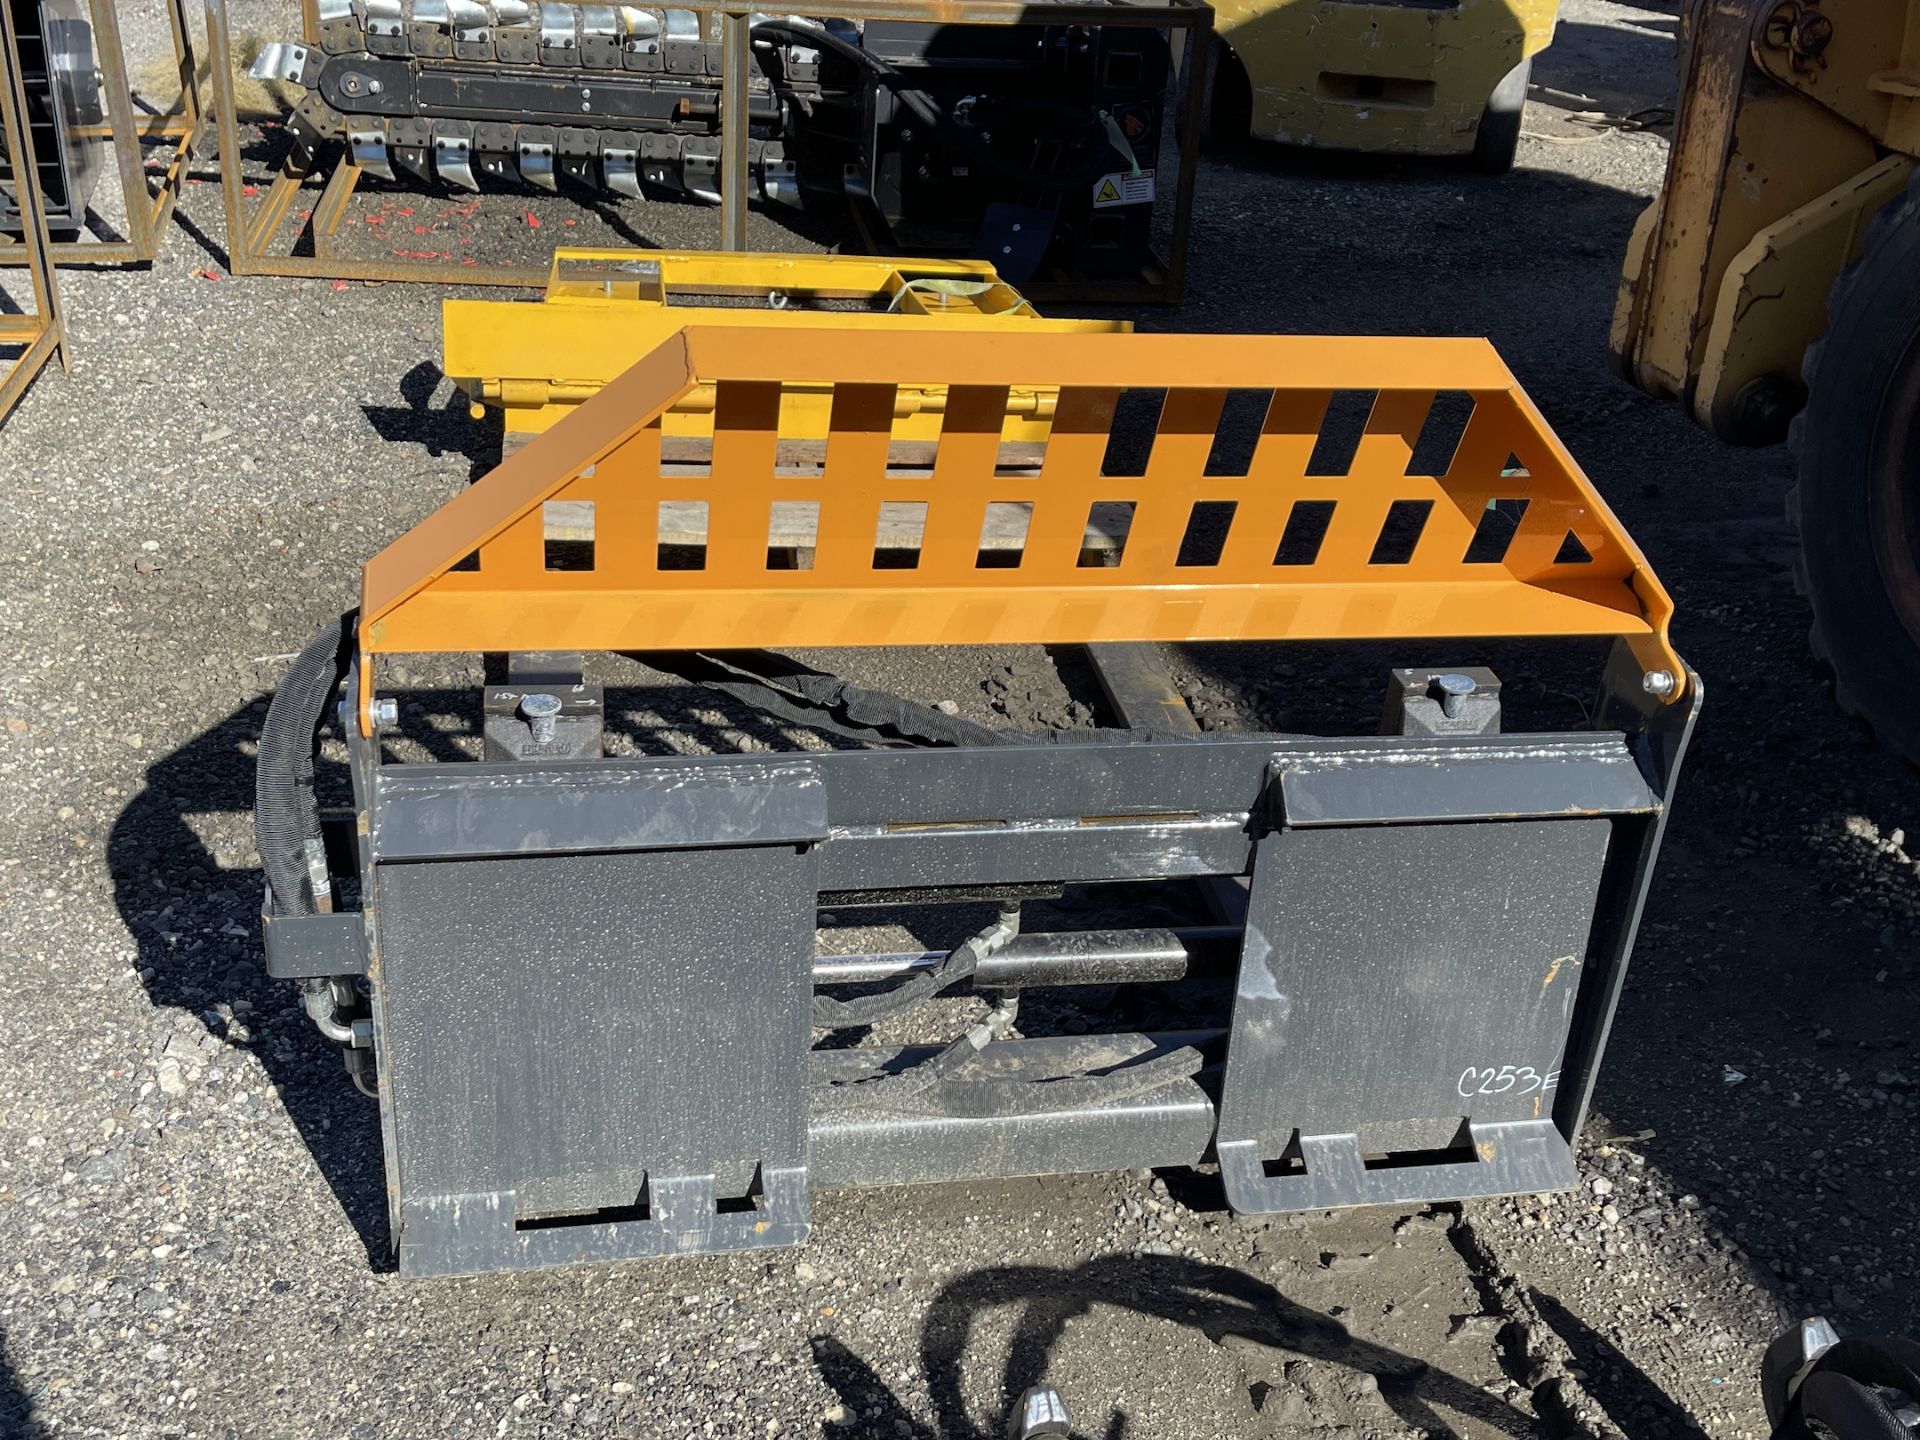 New Wolverine Skid Steer Fork Attachment (C253E) - Image 2 of 6